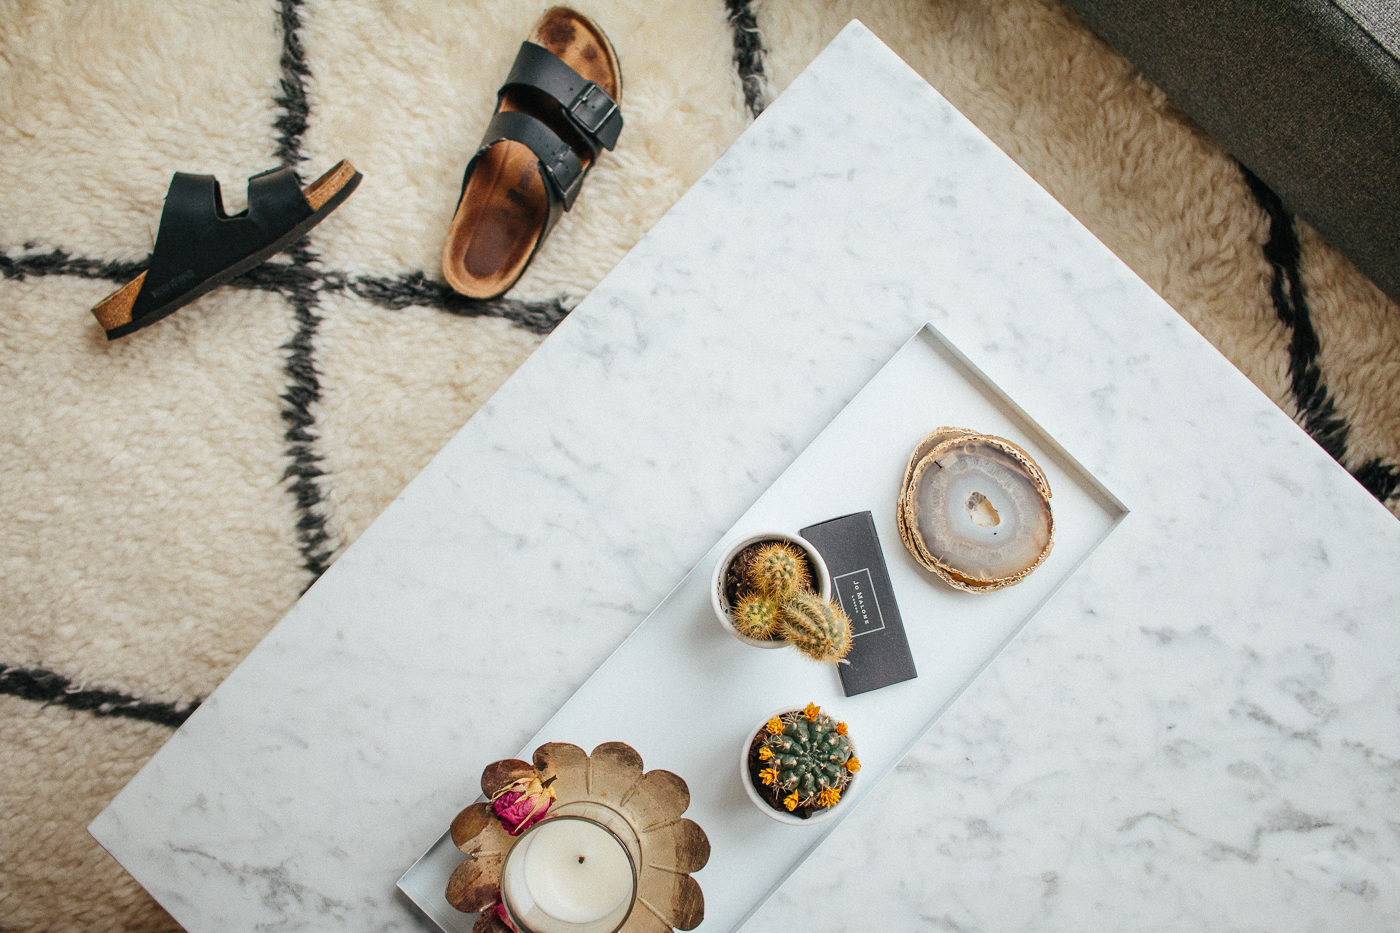 White Marble Coffee Table Interior Inspiration | Love Daily Dose